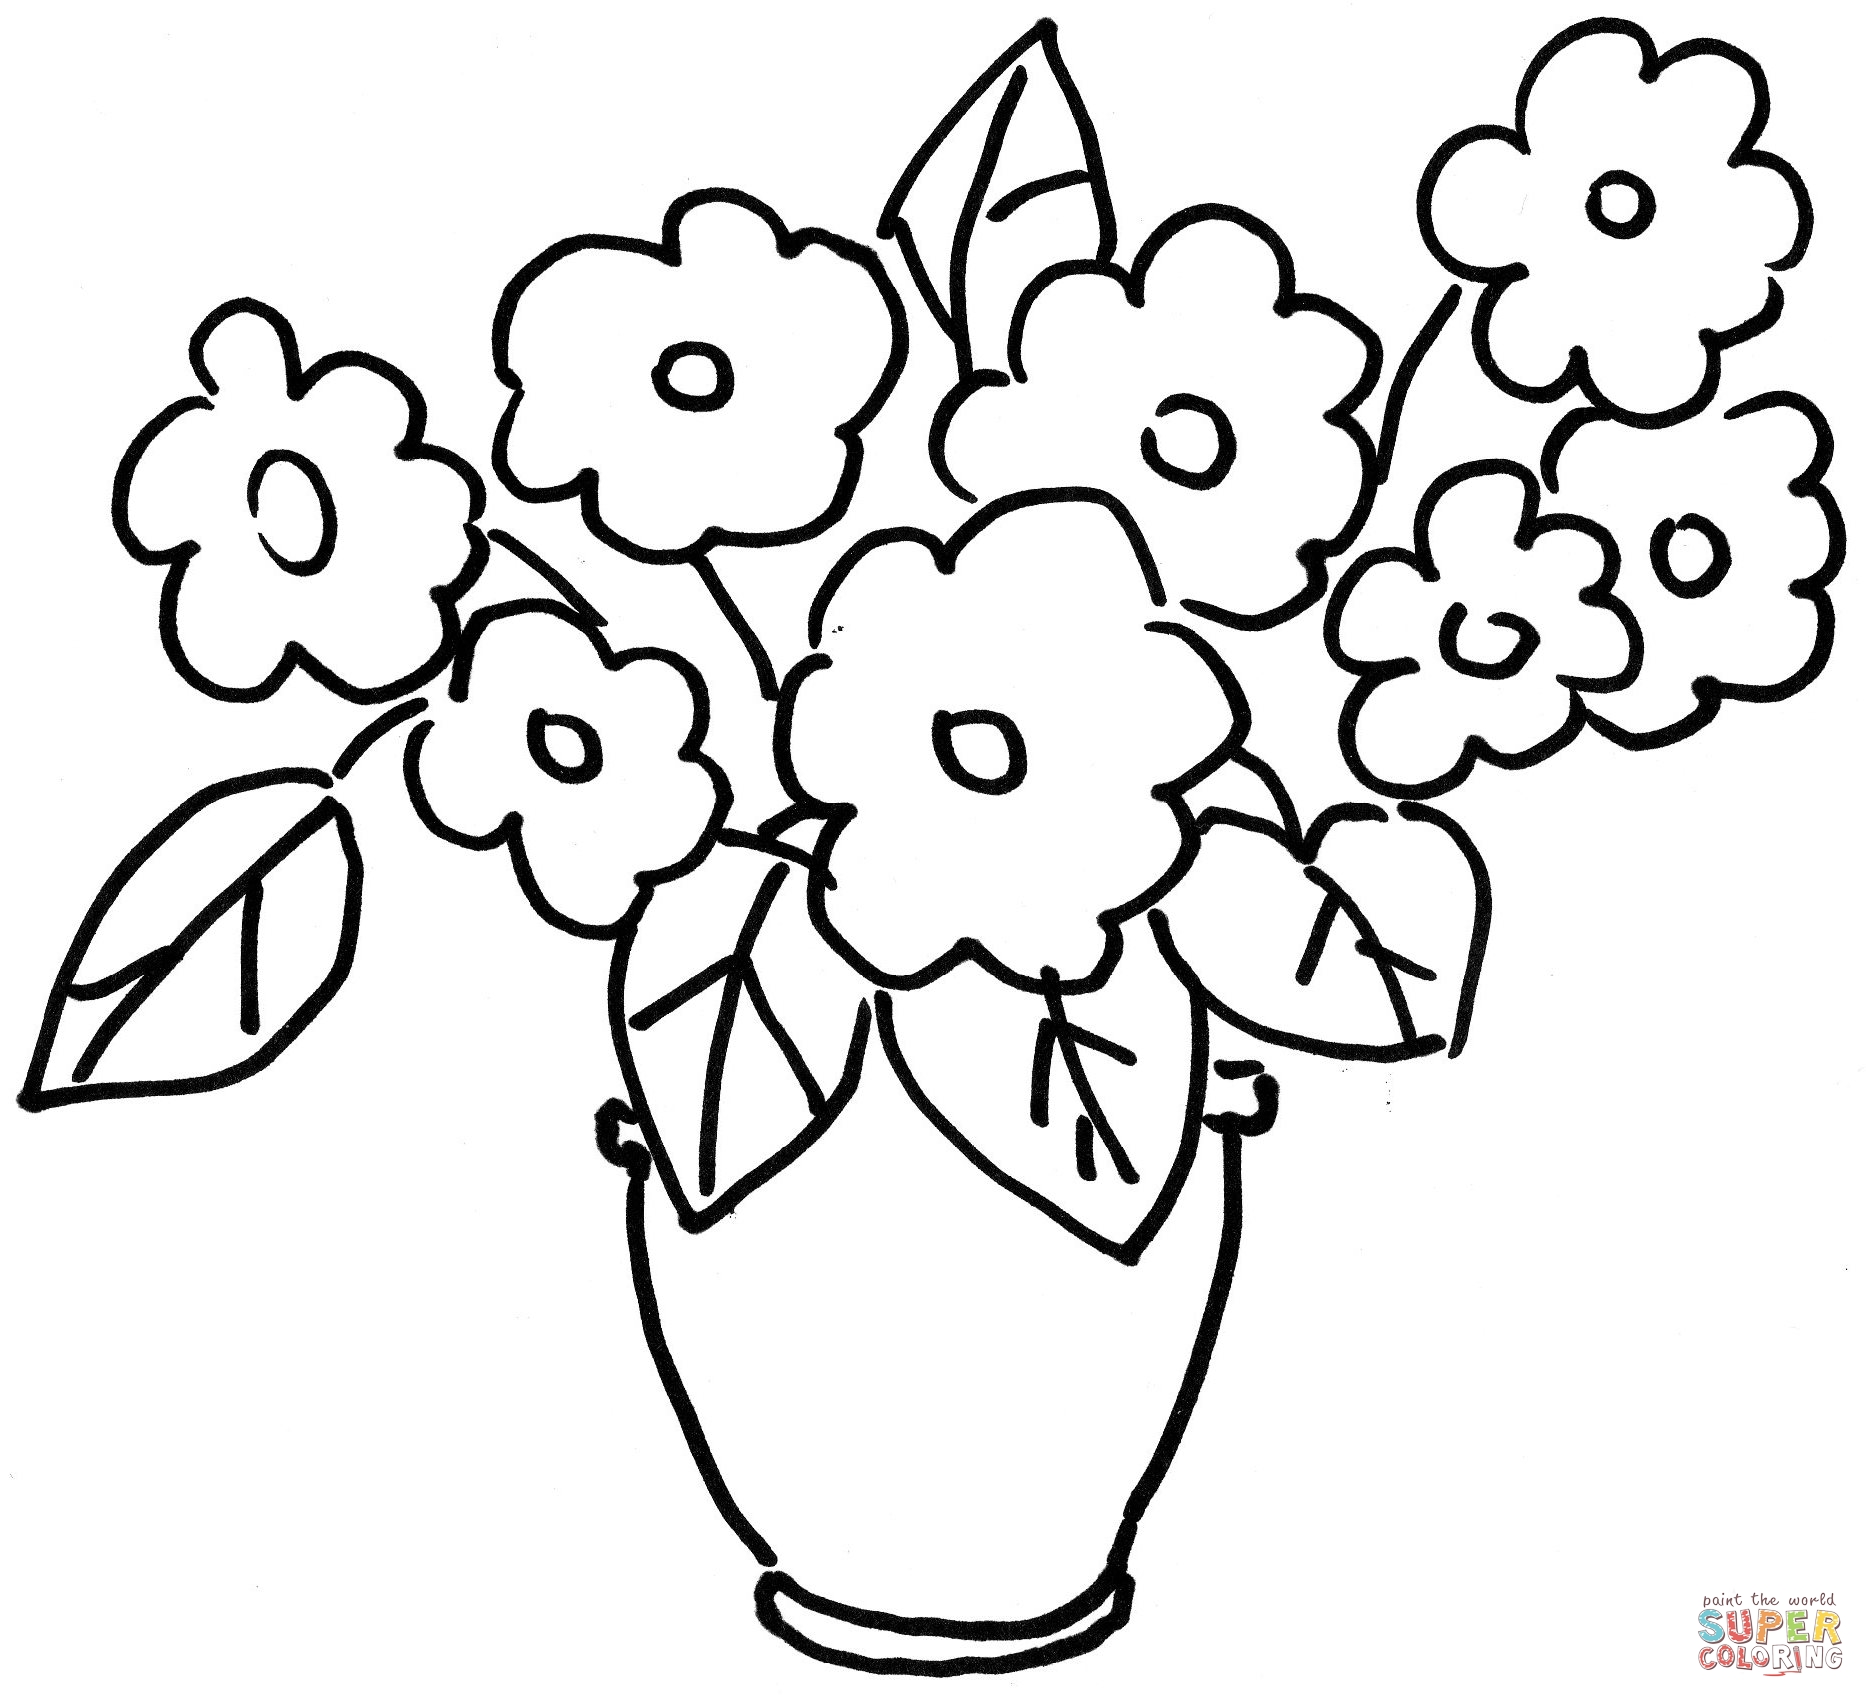 Pansy violets flower coloring page free printable coloring pages